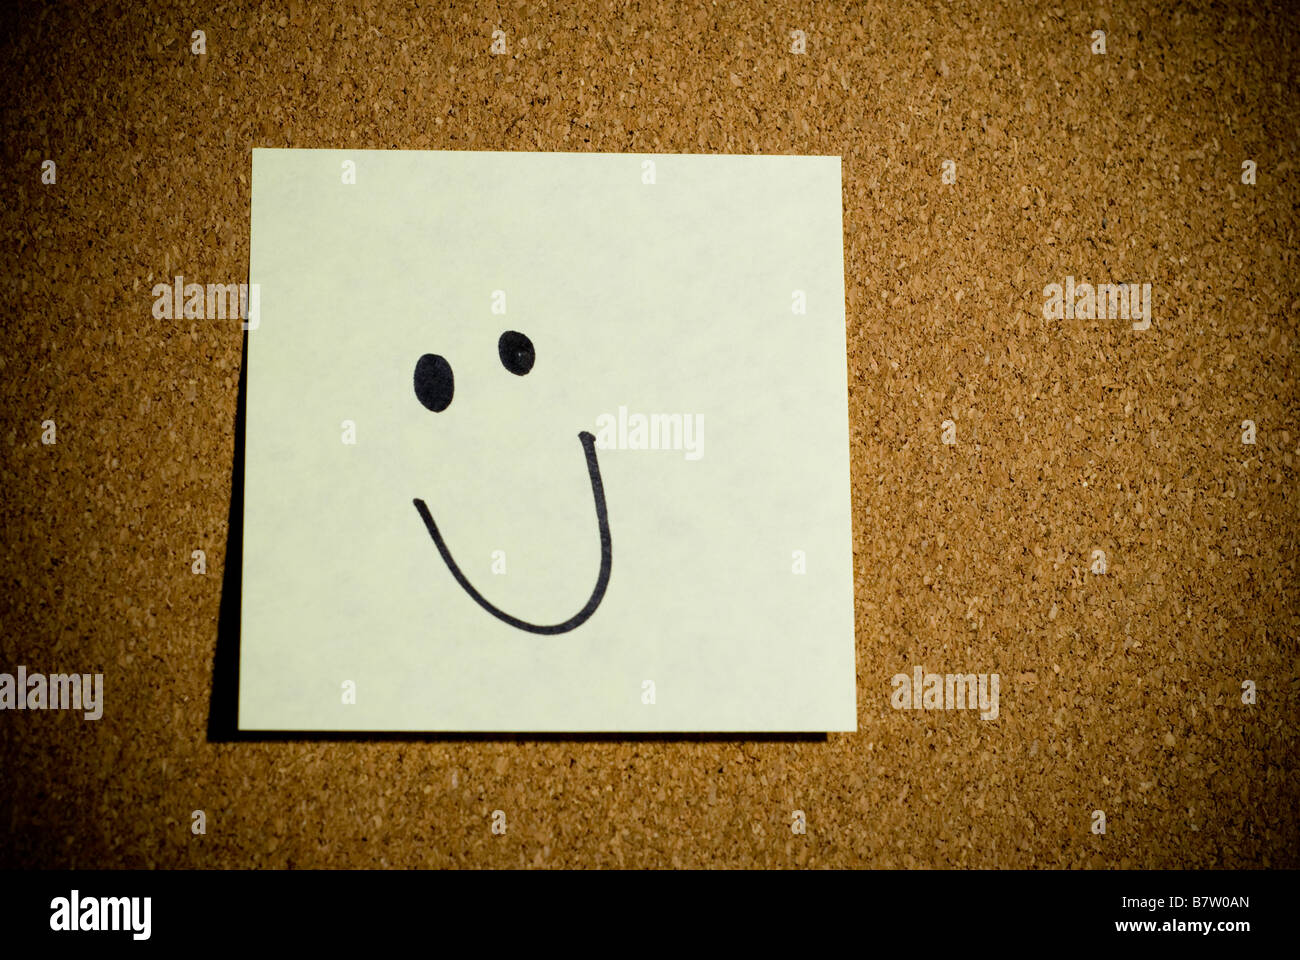 Post it note or memo on a cork board that has a smiley face. Stock Photo